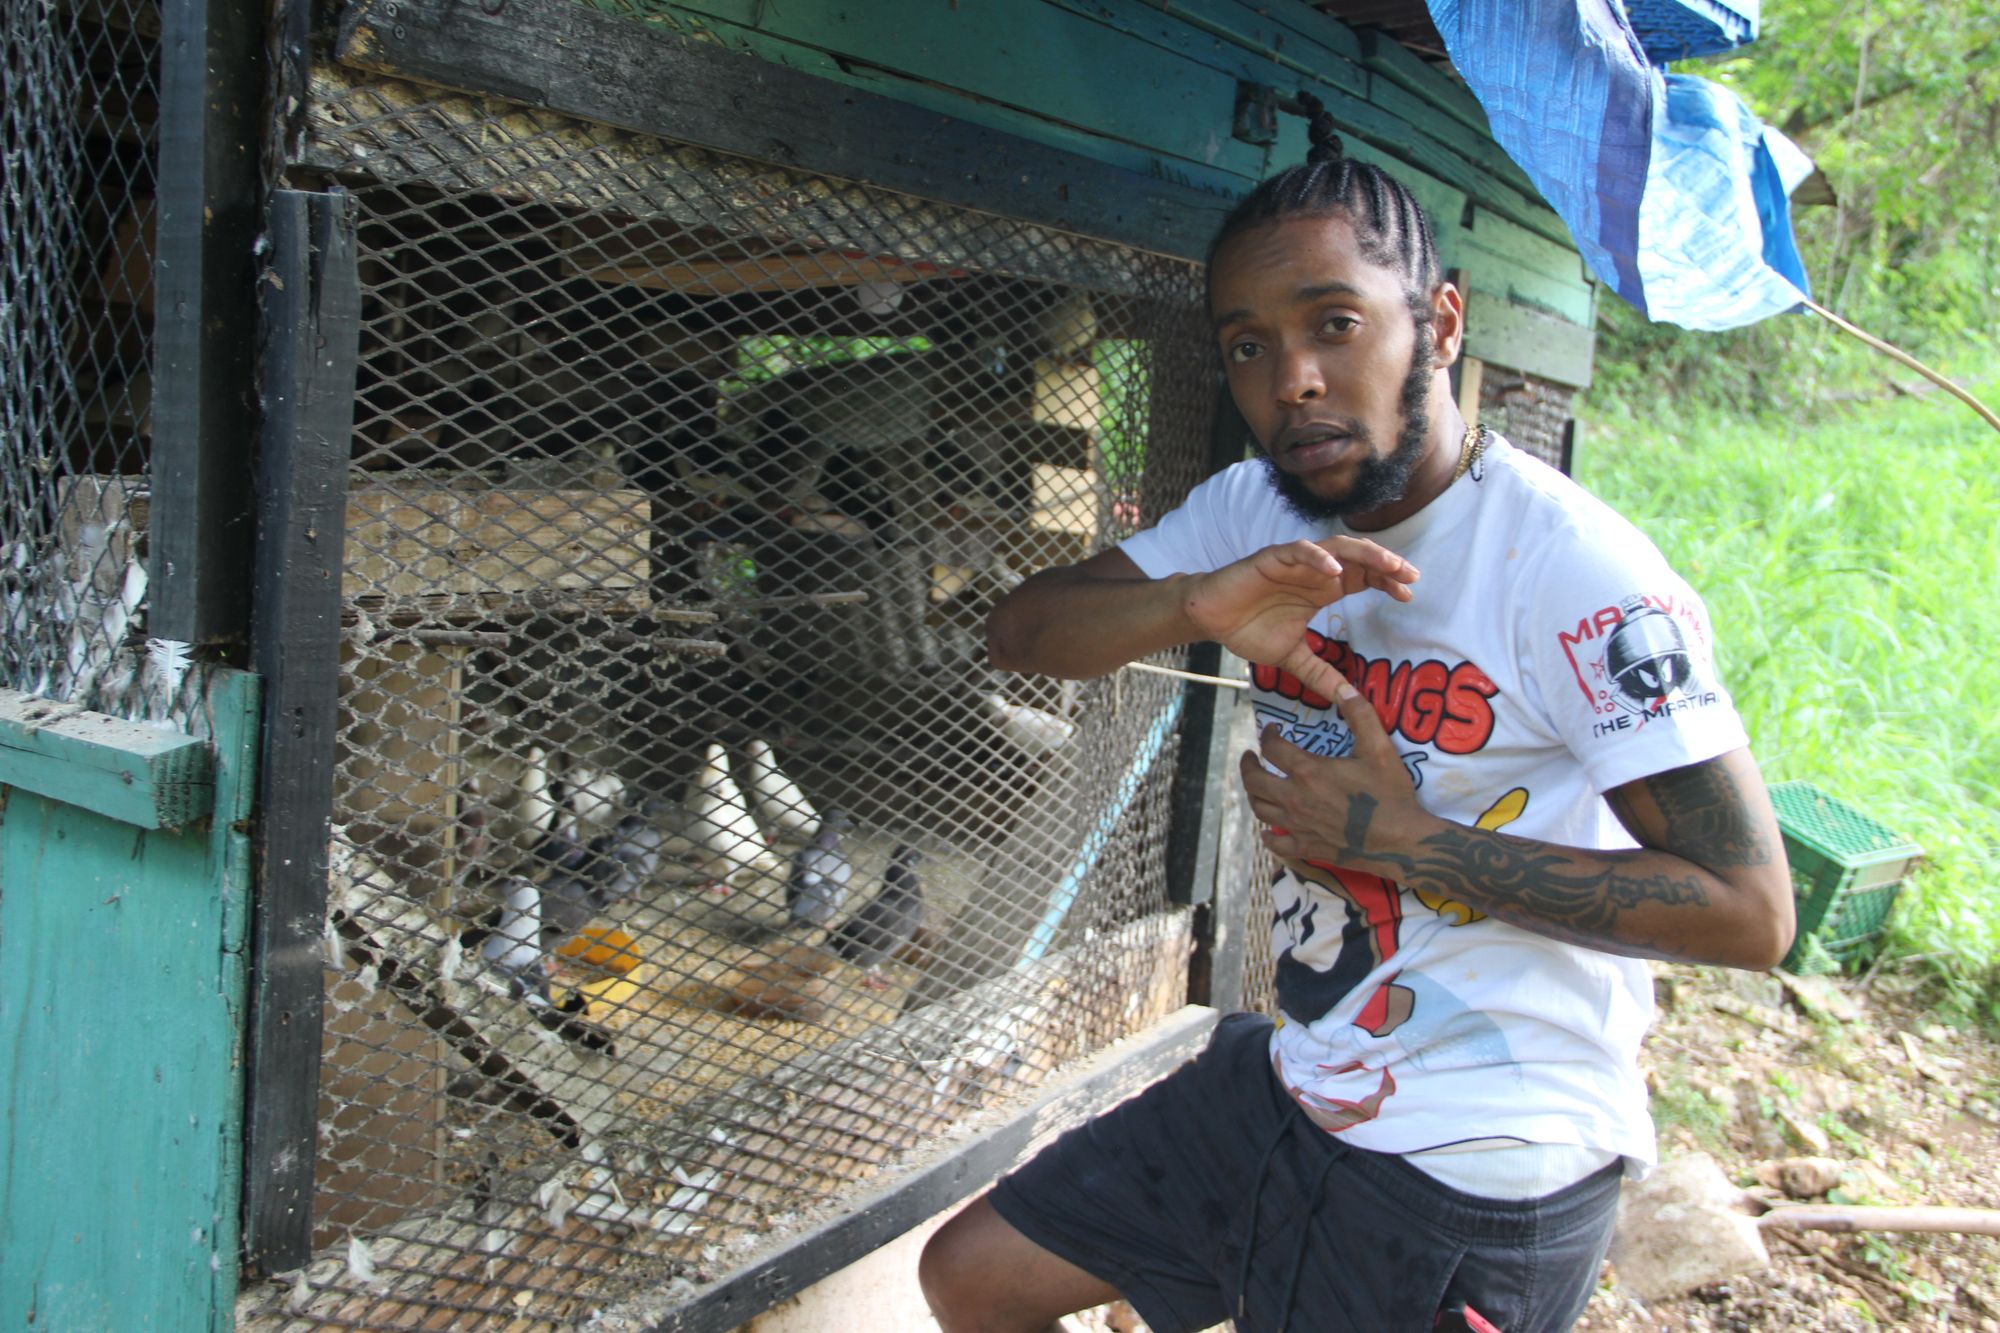 A man signals with his hands in front of an outdoor dove cage, gazing into the camera.